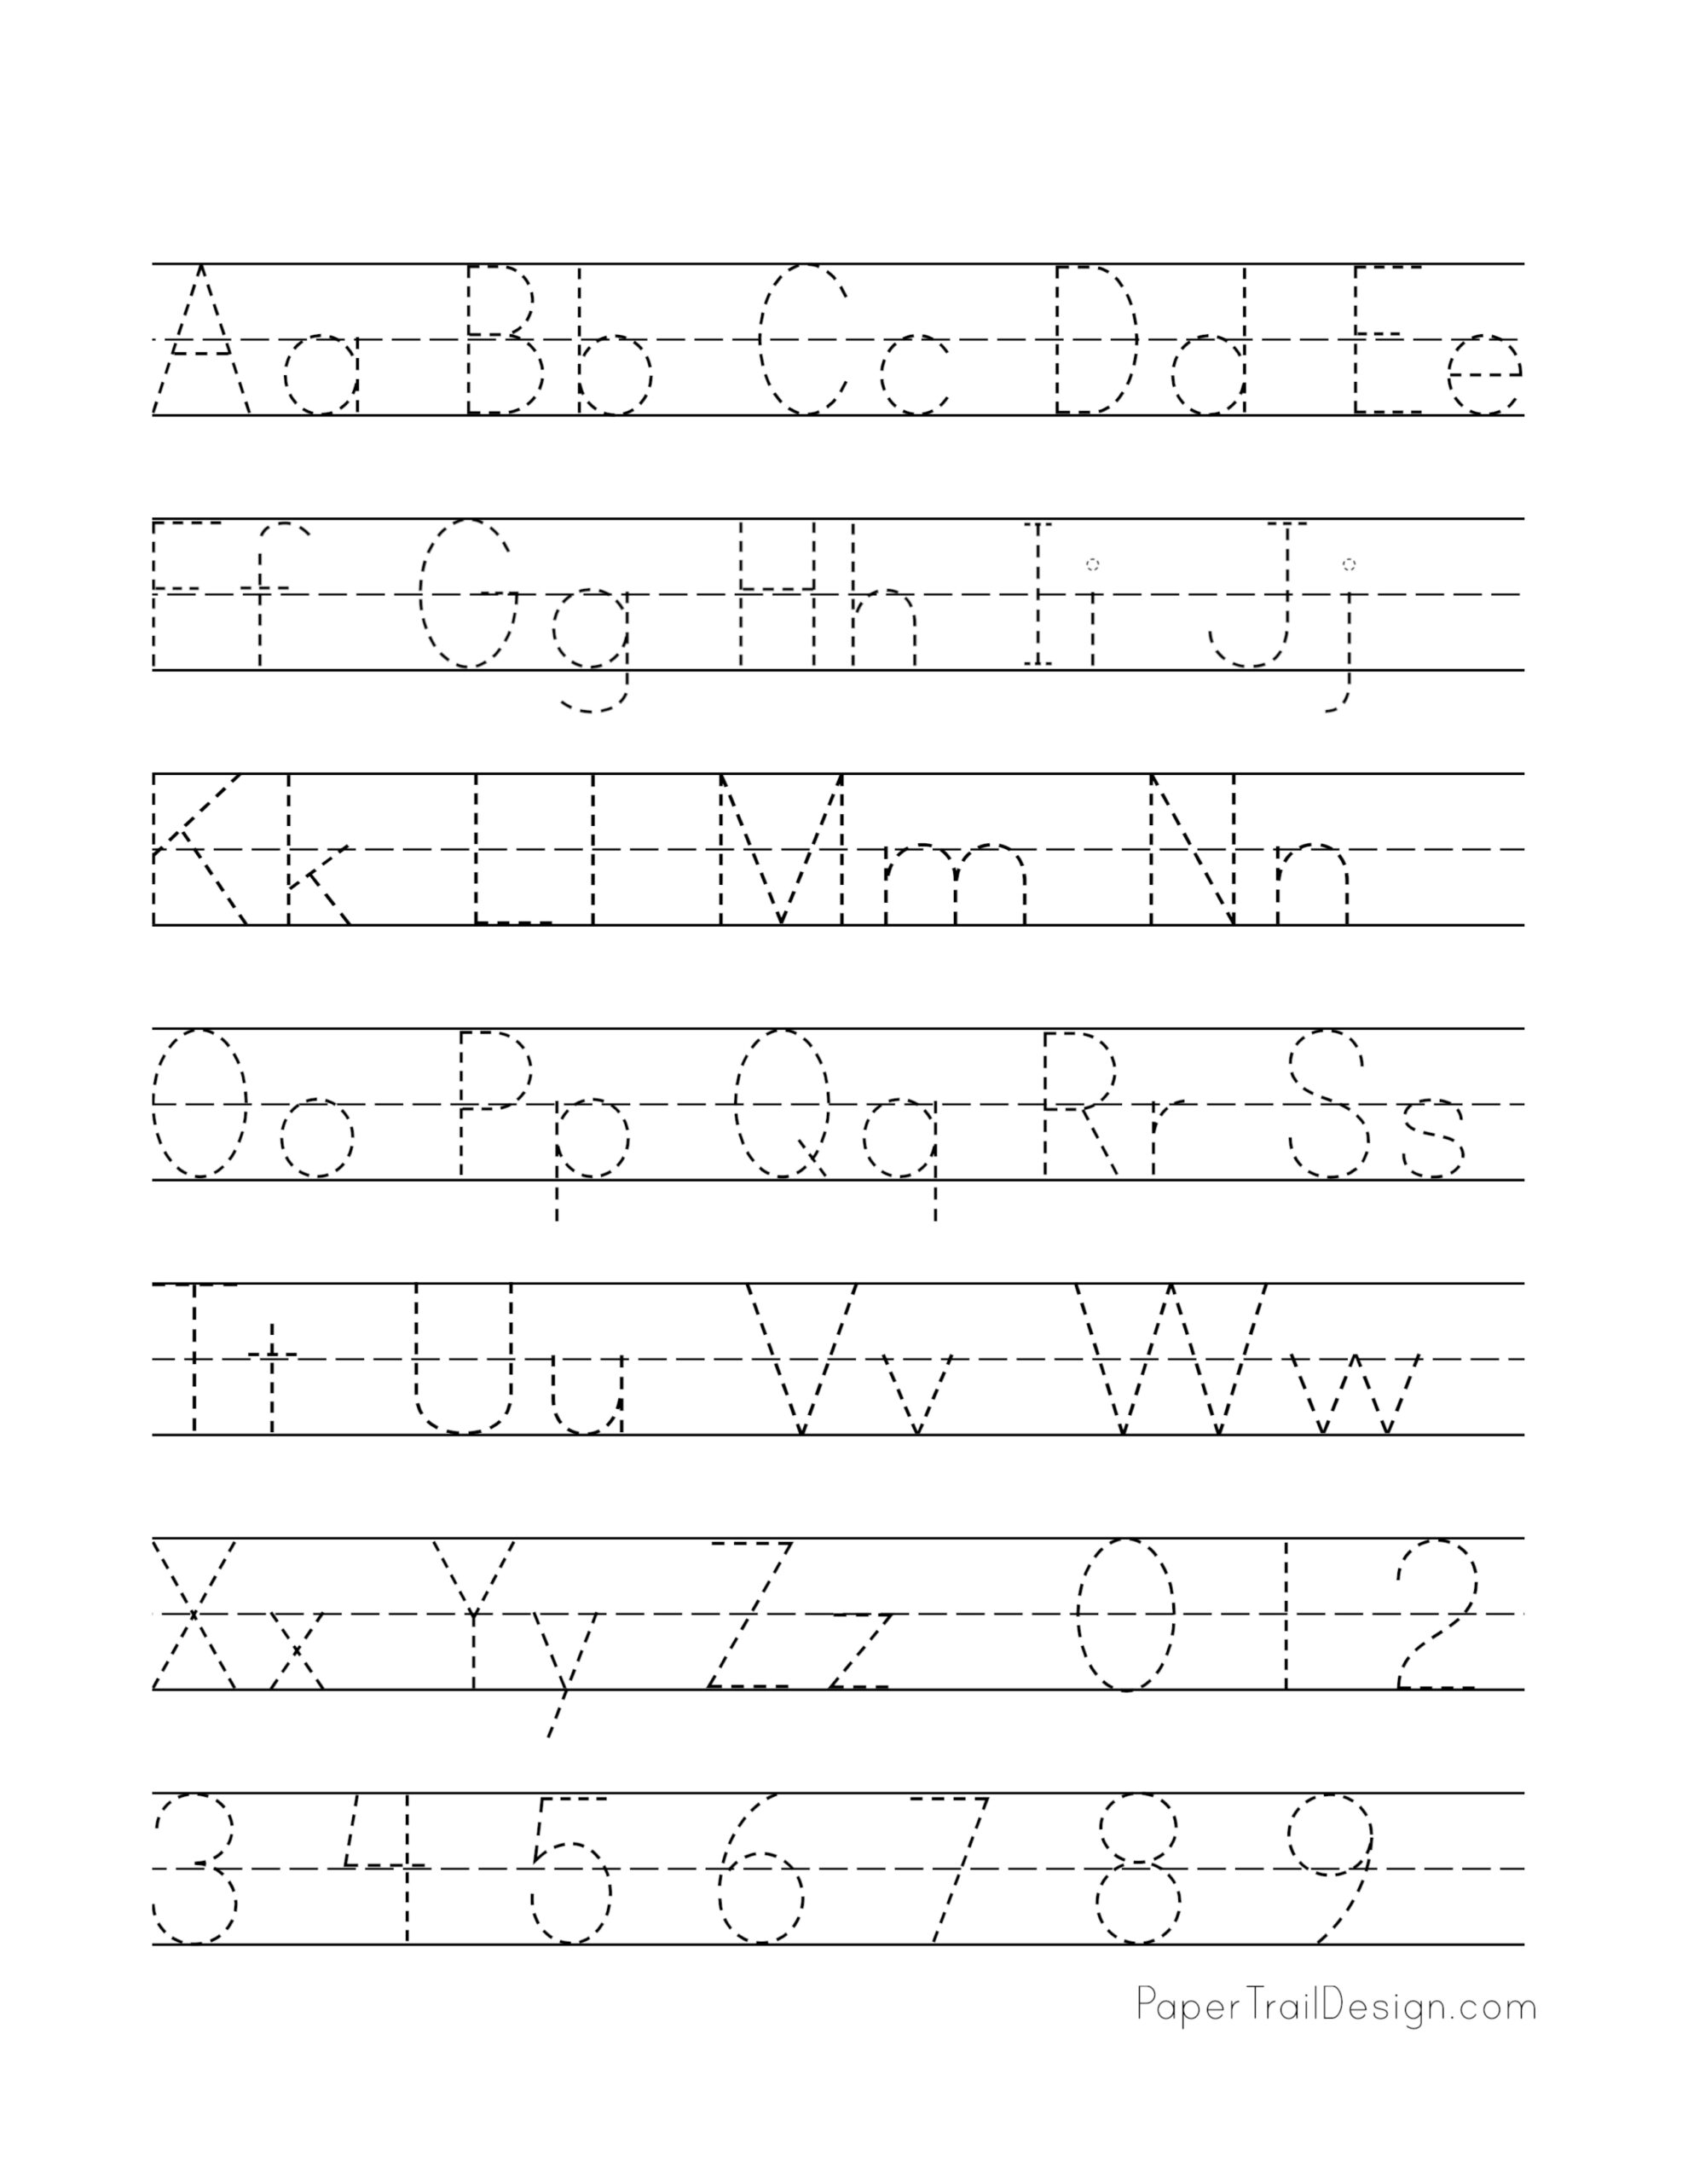 45-alphabet-printing-worksheets-image-rugby-rumilly